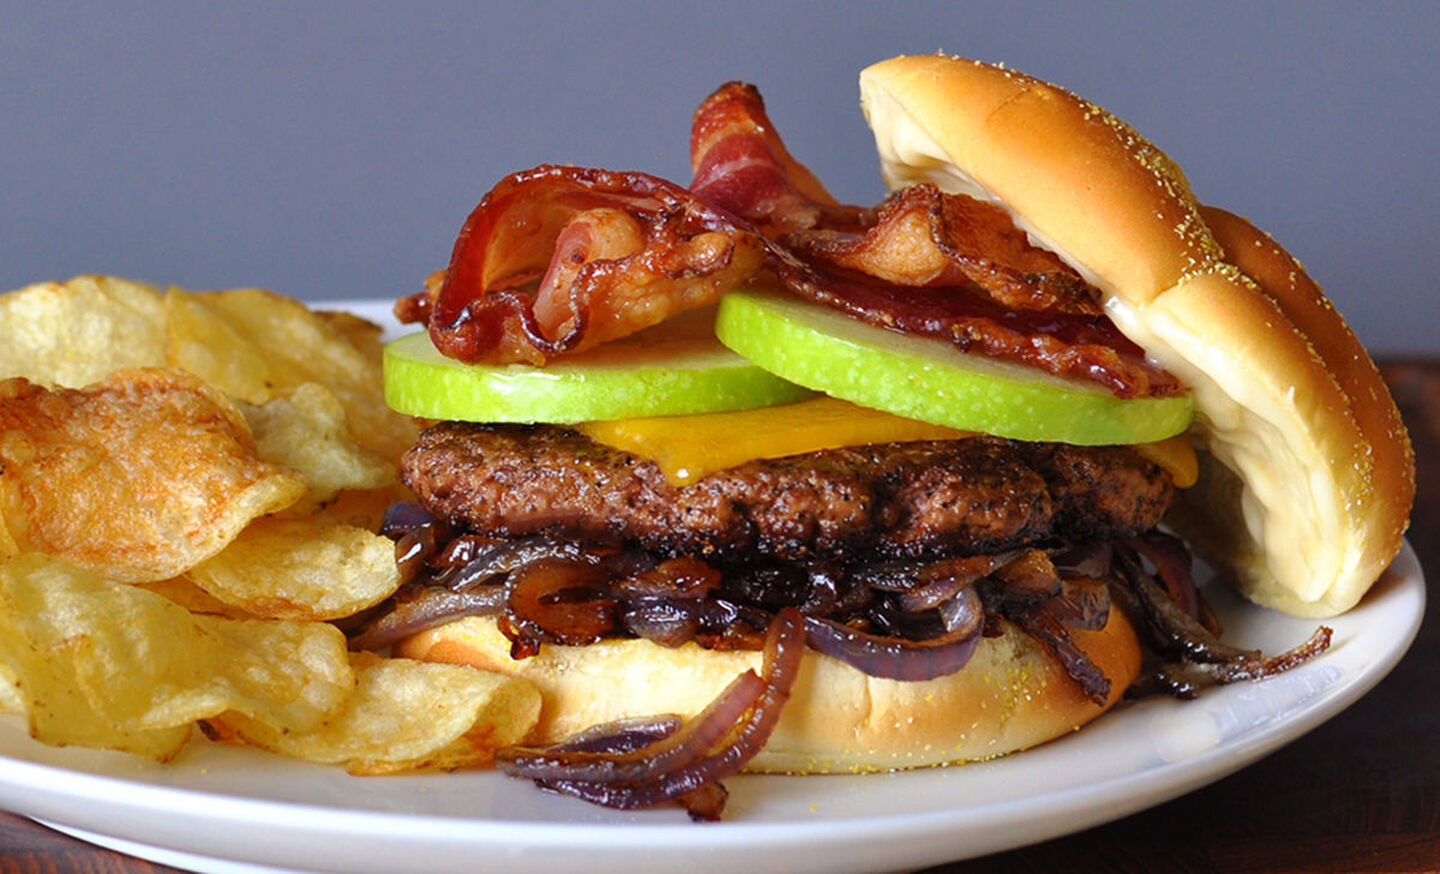 Candied Bacon Maple Cheddar Burger